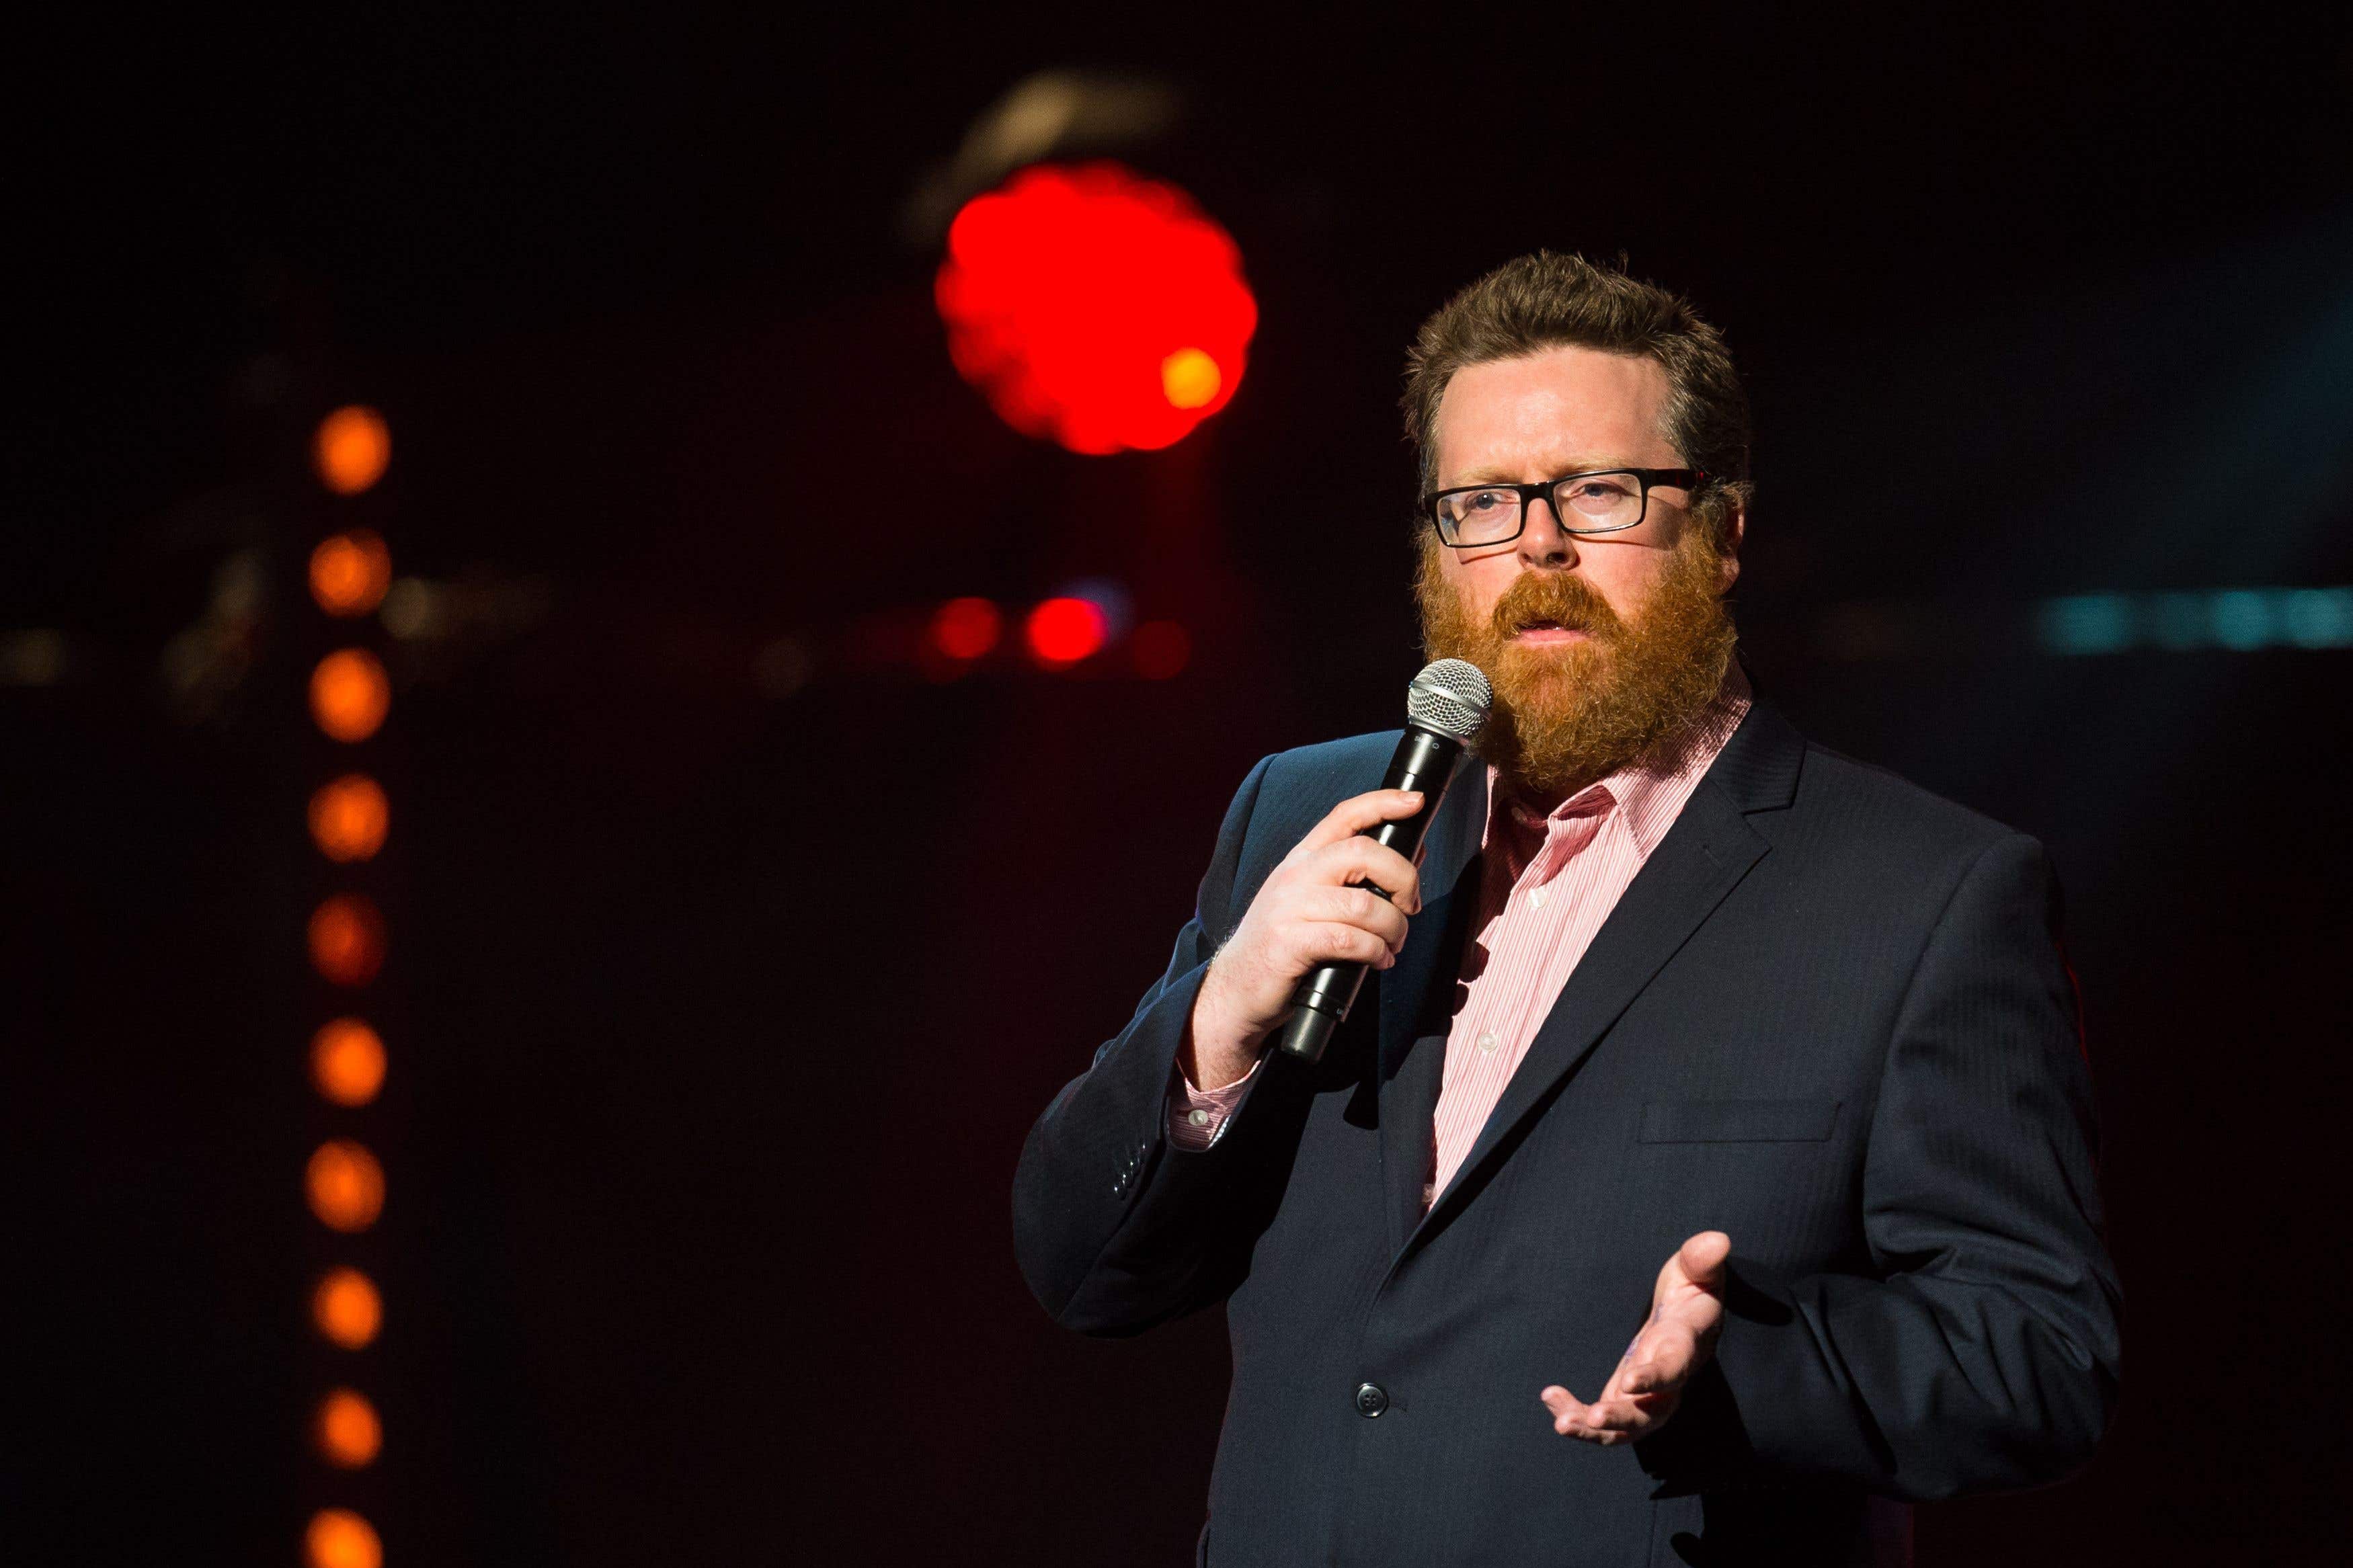 Frankie Boyle has supported the campaign against approval of the Rosebank oil and gas field (Dominic Lipinski/PA)